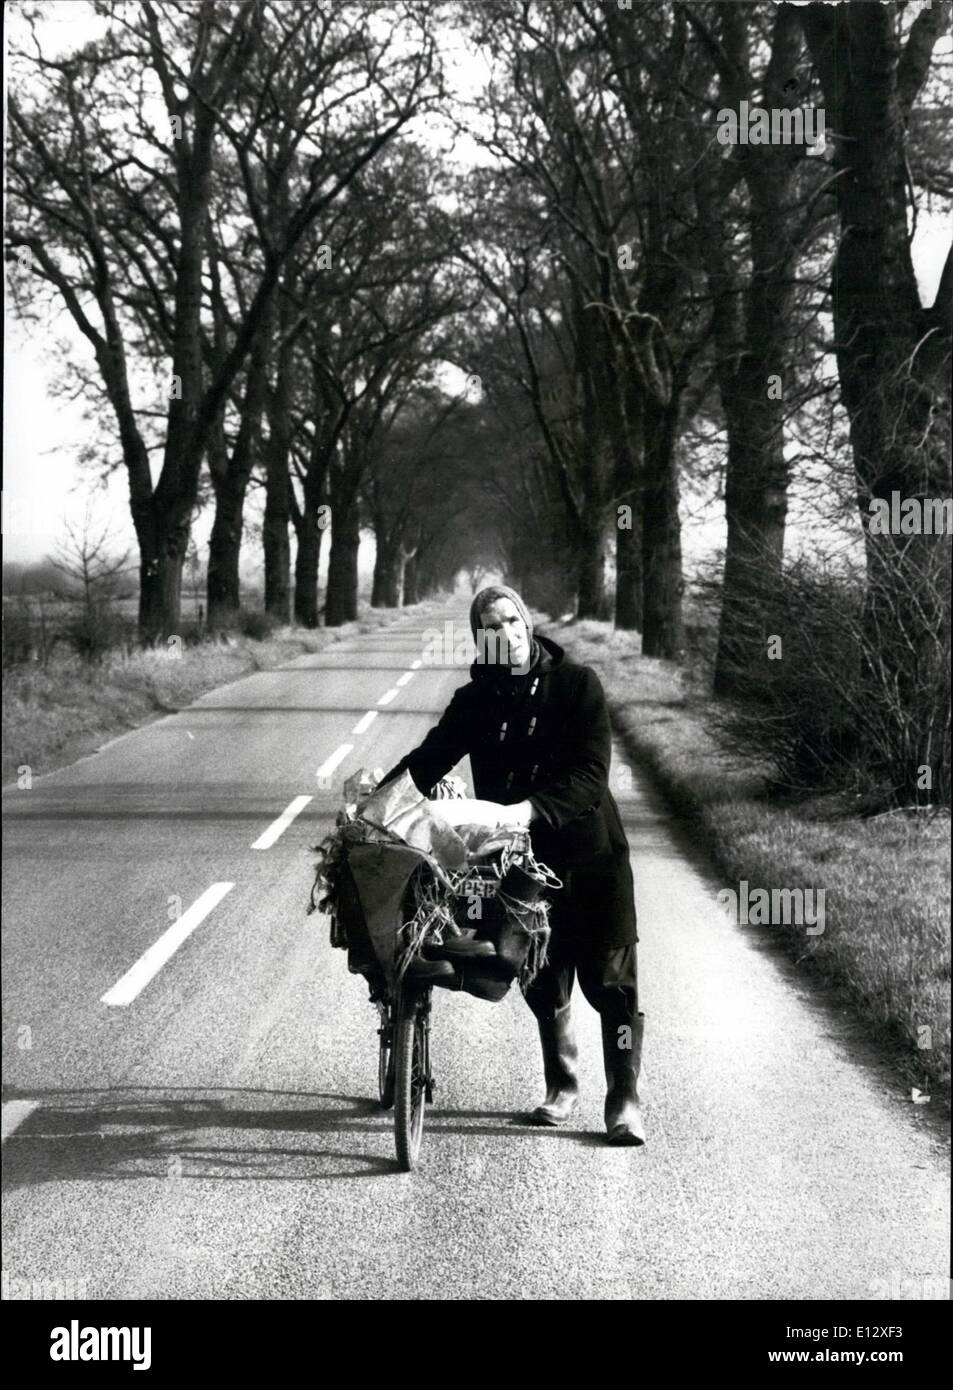 Feb. 25, 2012 - The long, straight road ahead-that's ow 62 year old Alan Barker seems it as he goes about the 20 mile a day newspaper round that he has been doing for 34 years. Stock Photo